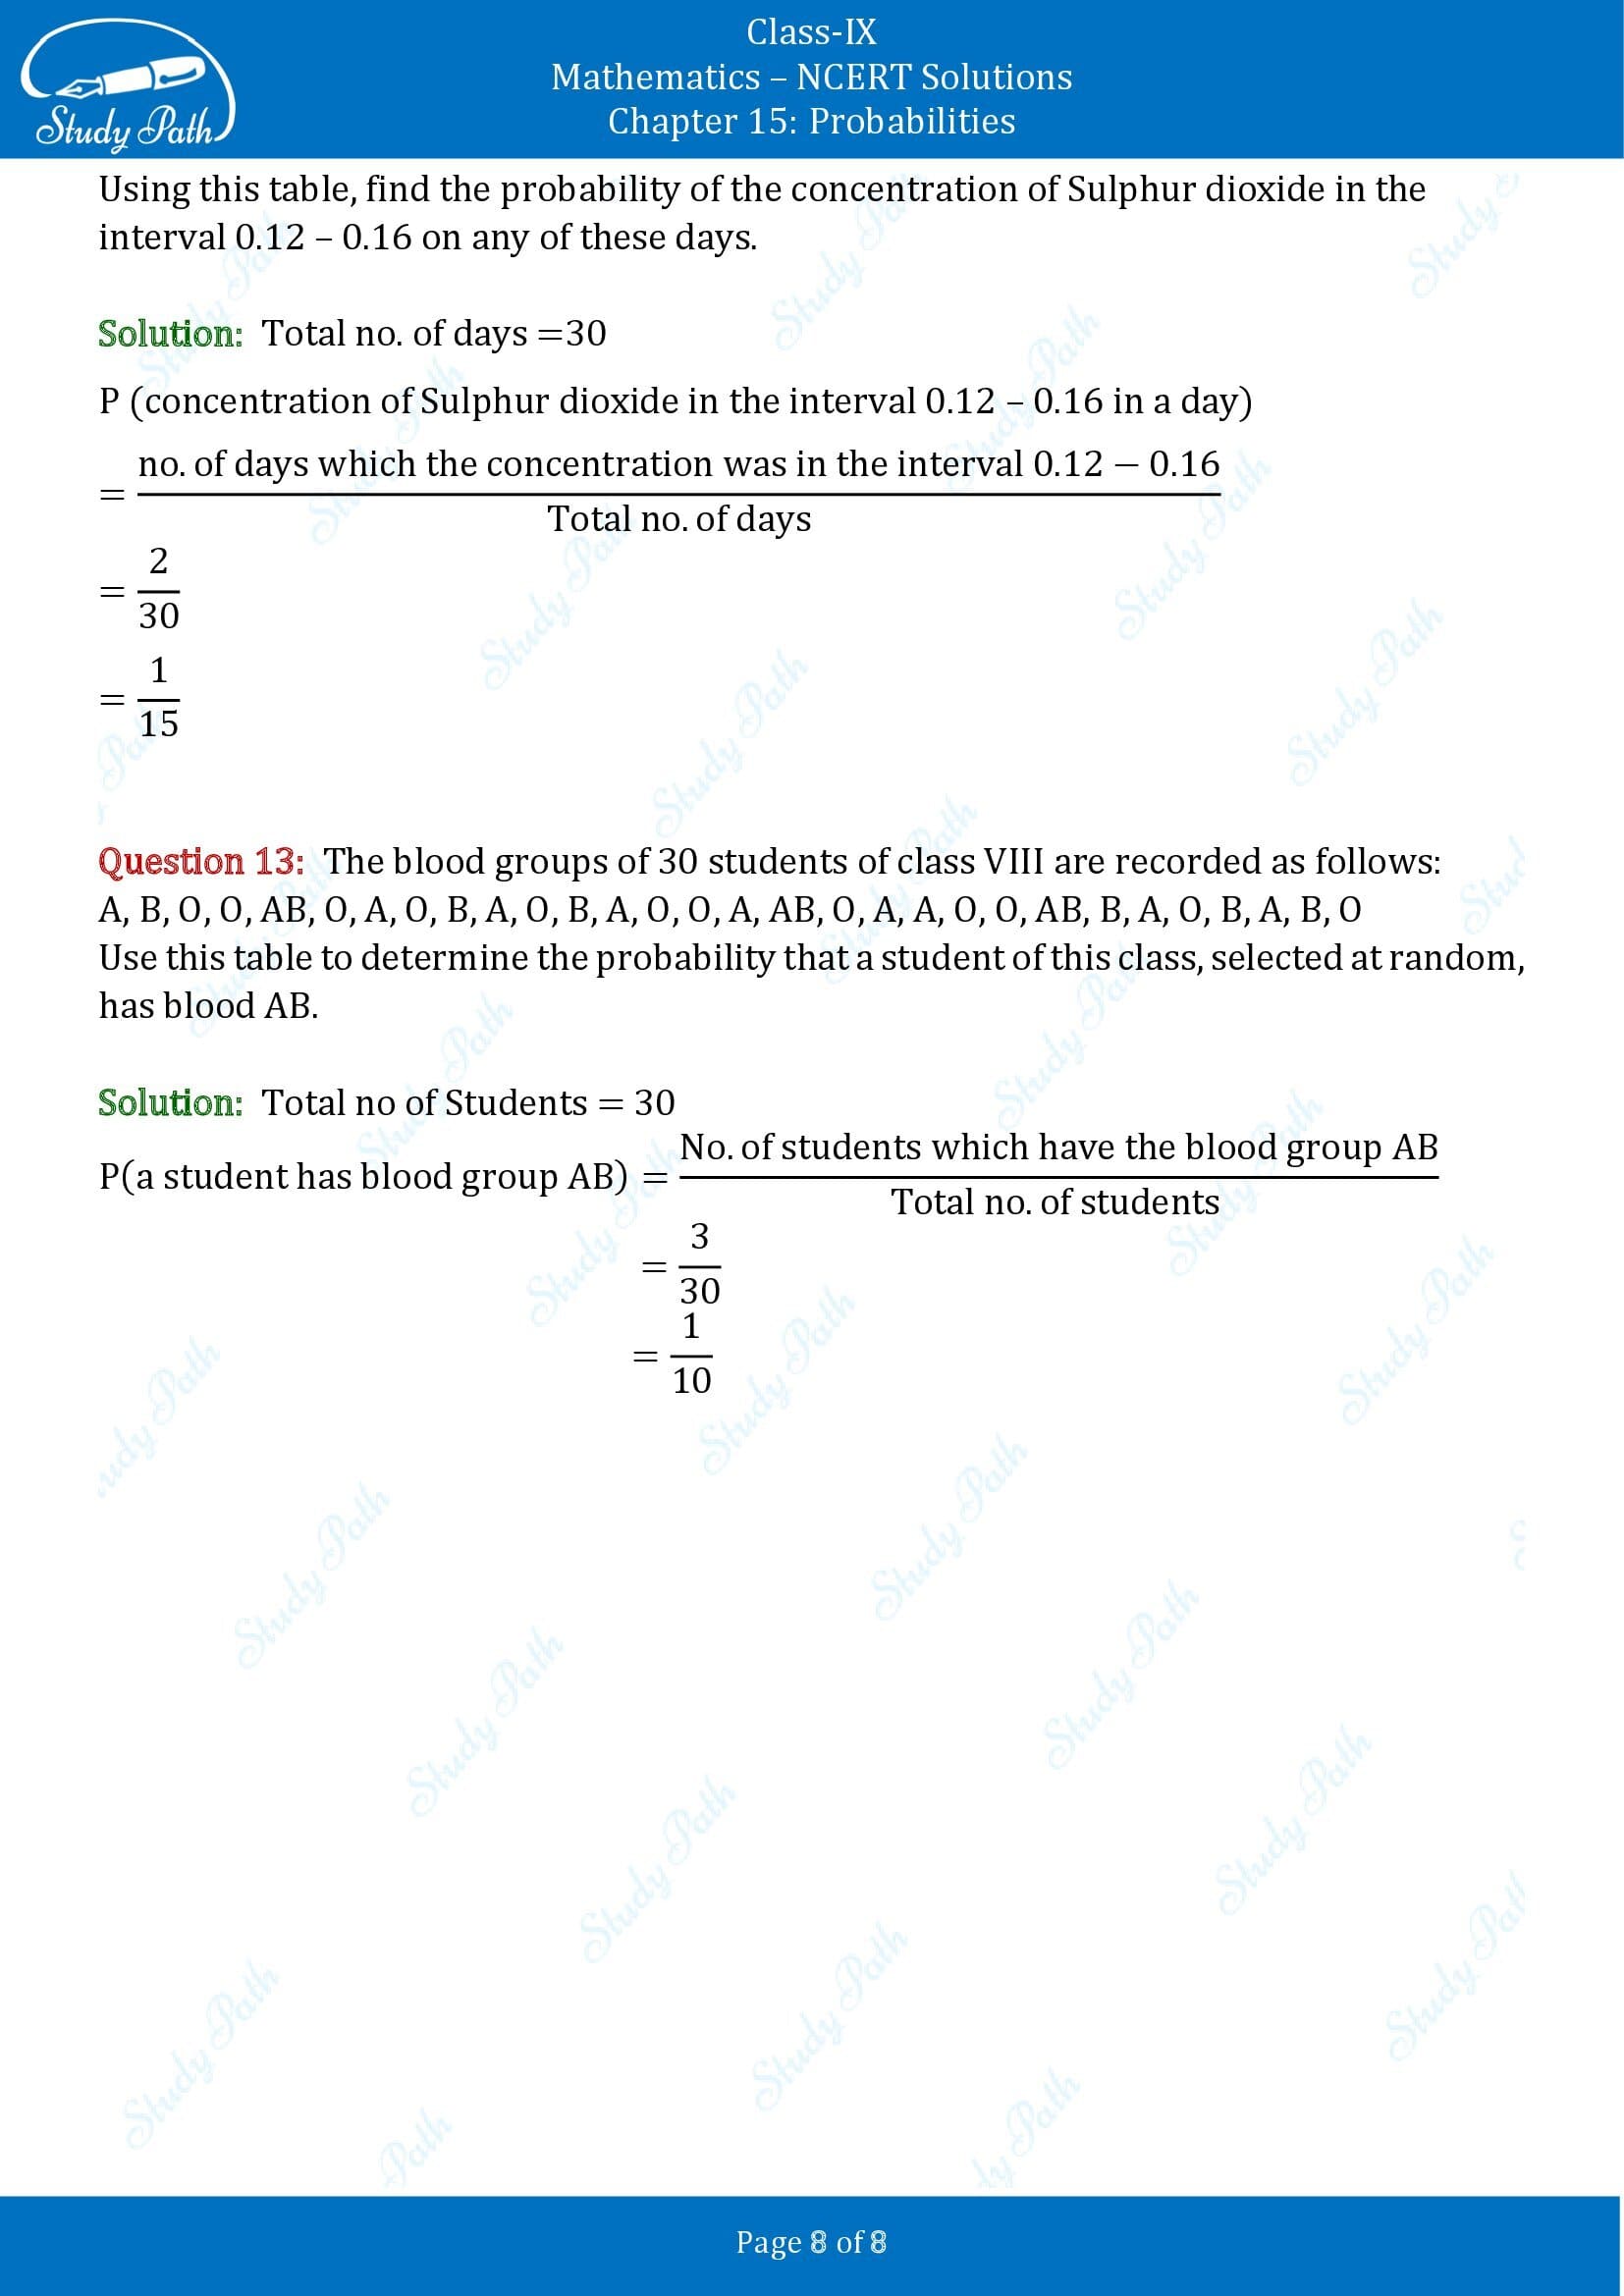 NCERT Solutions for Class 9 Maths Chapter 15 Probabilities 00008